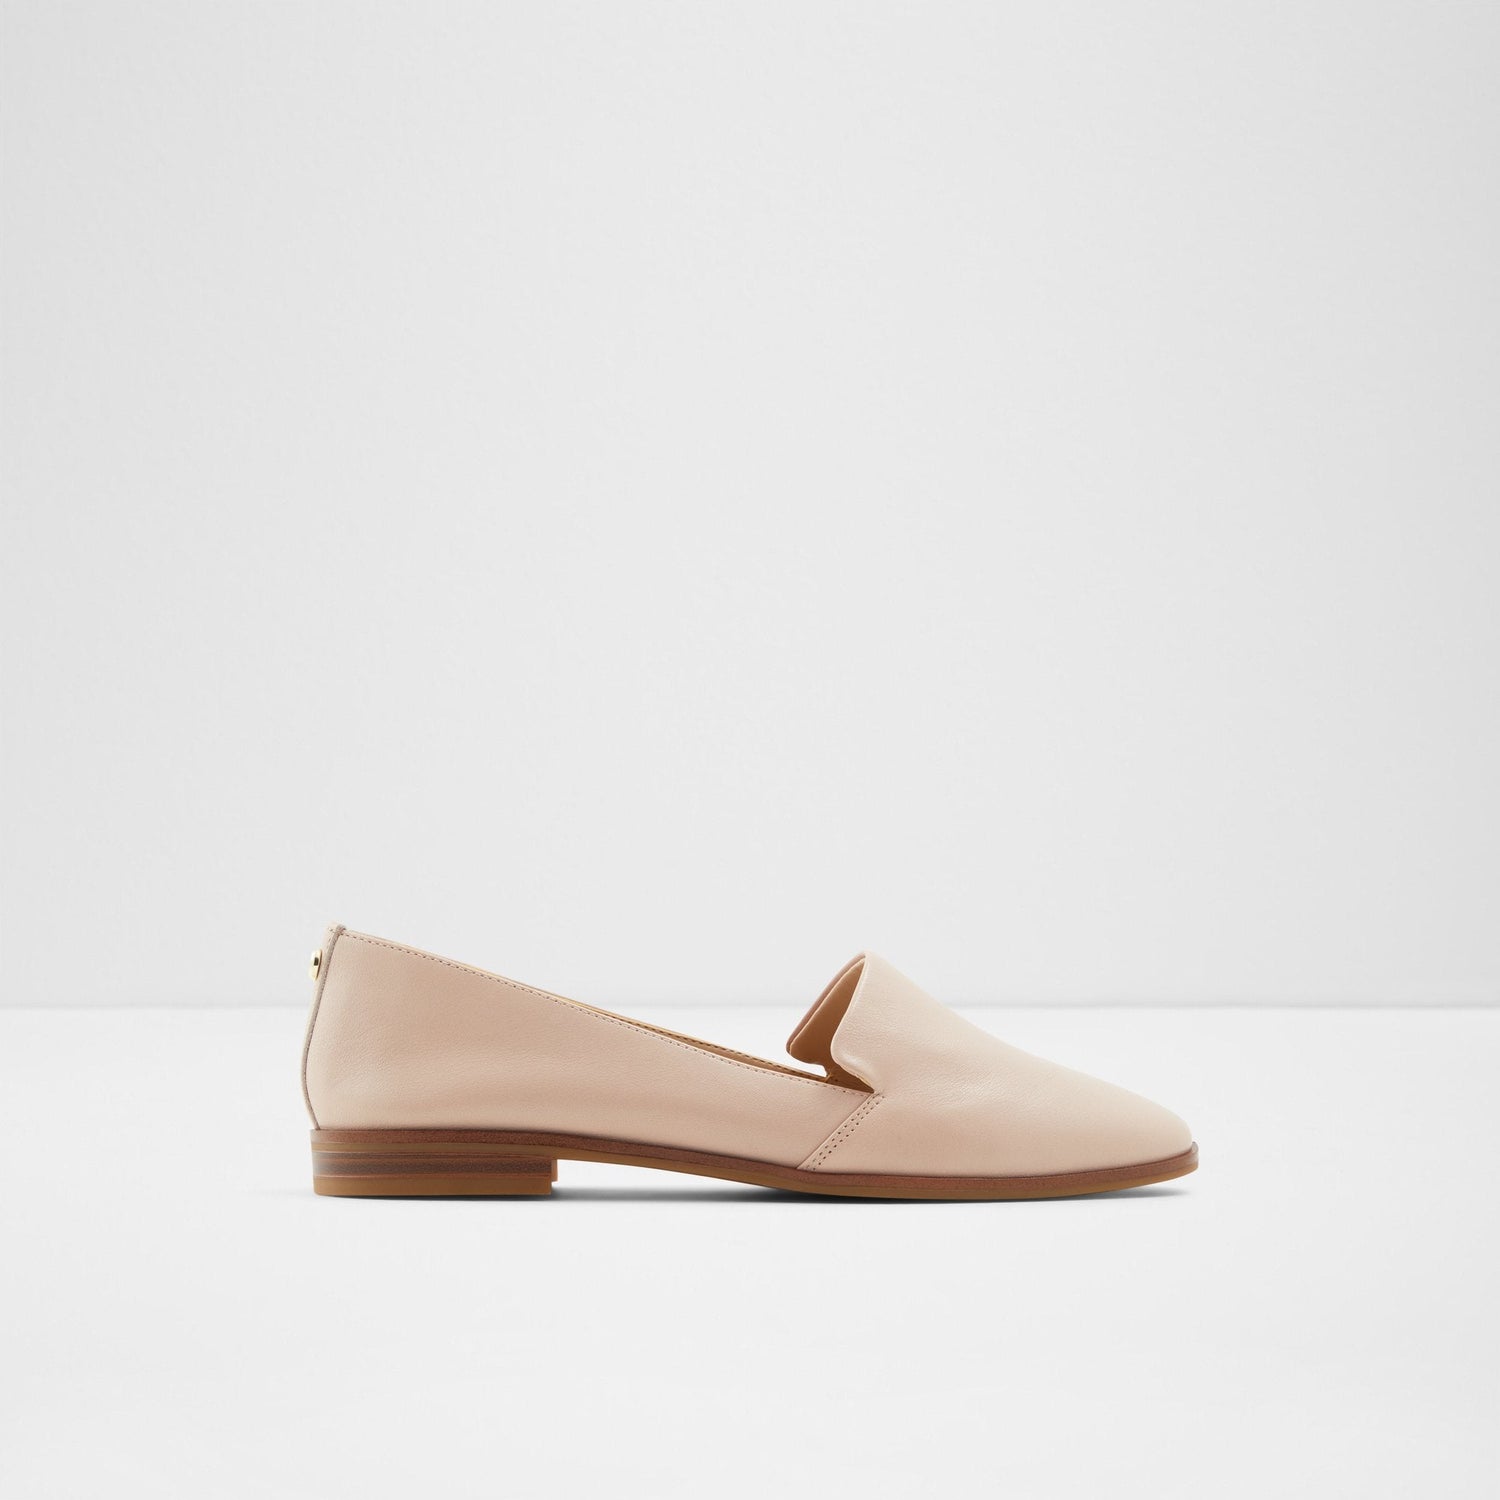 Veadith Loafers